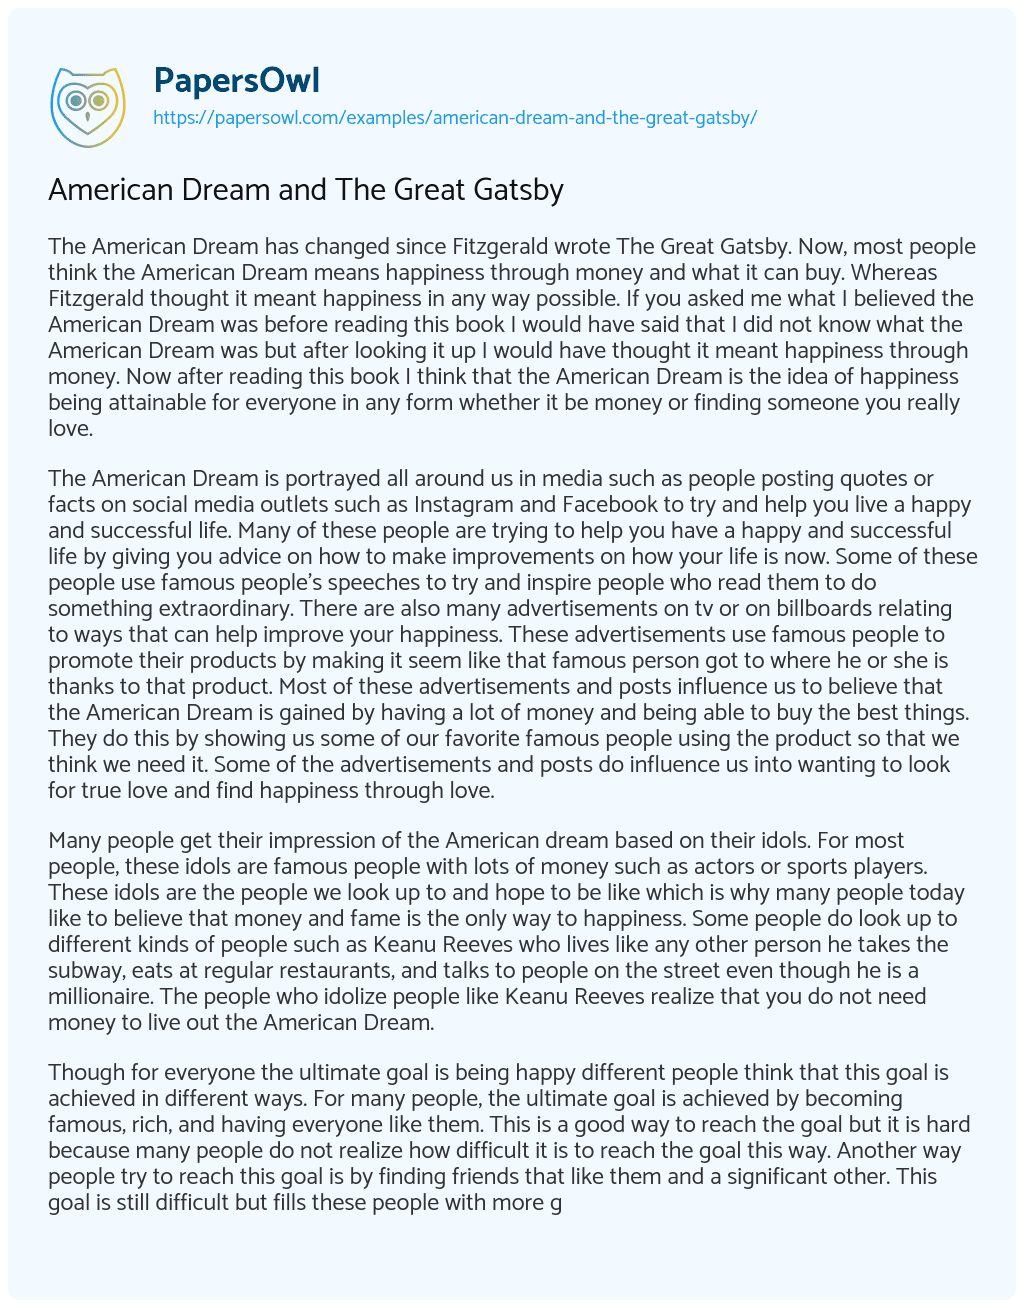 Essay on American Dream and the Great Gatsby